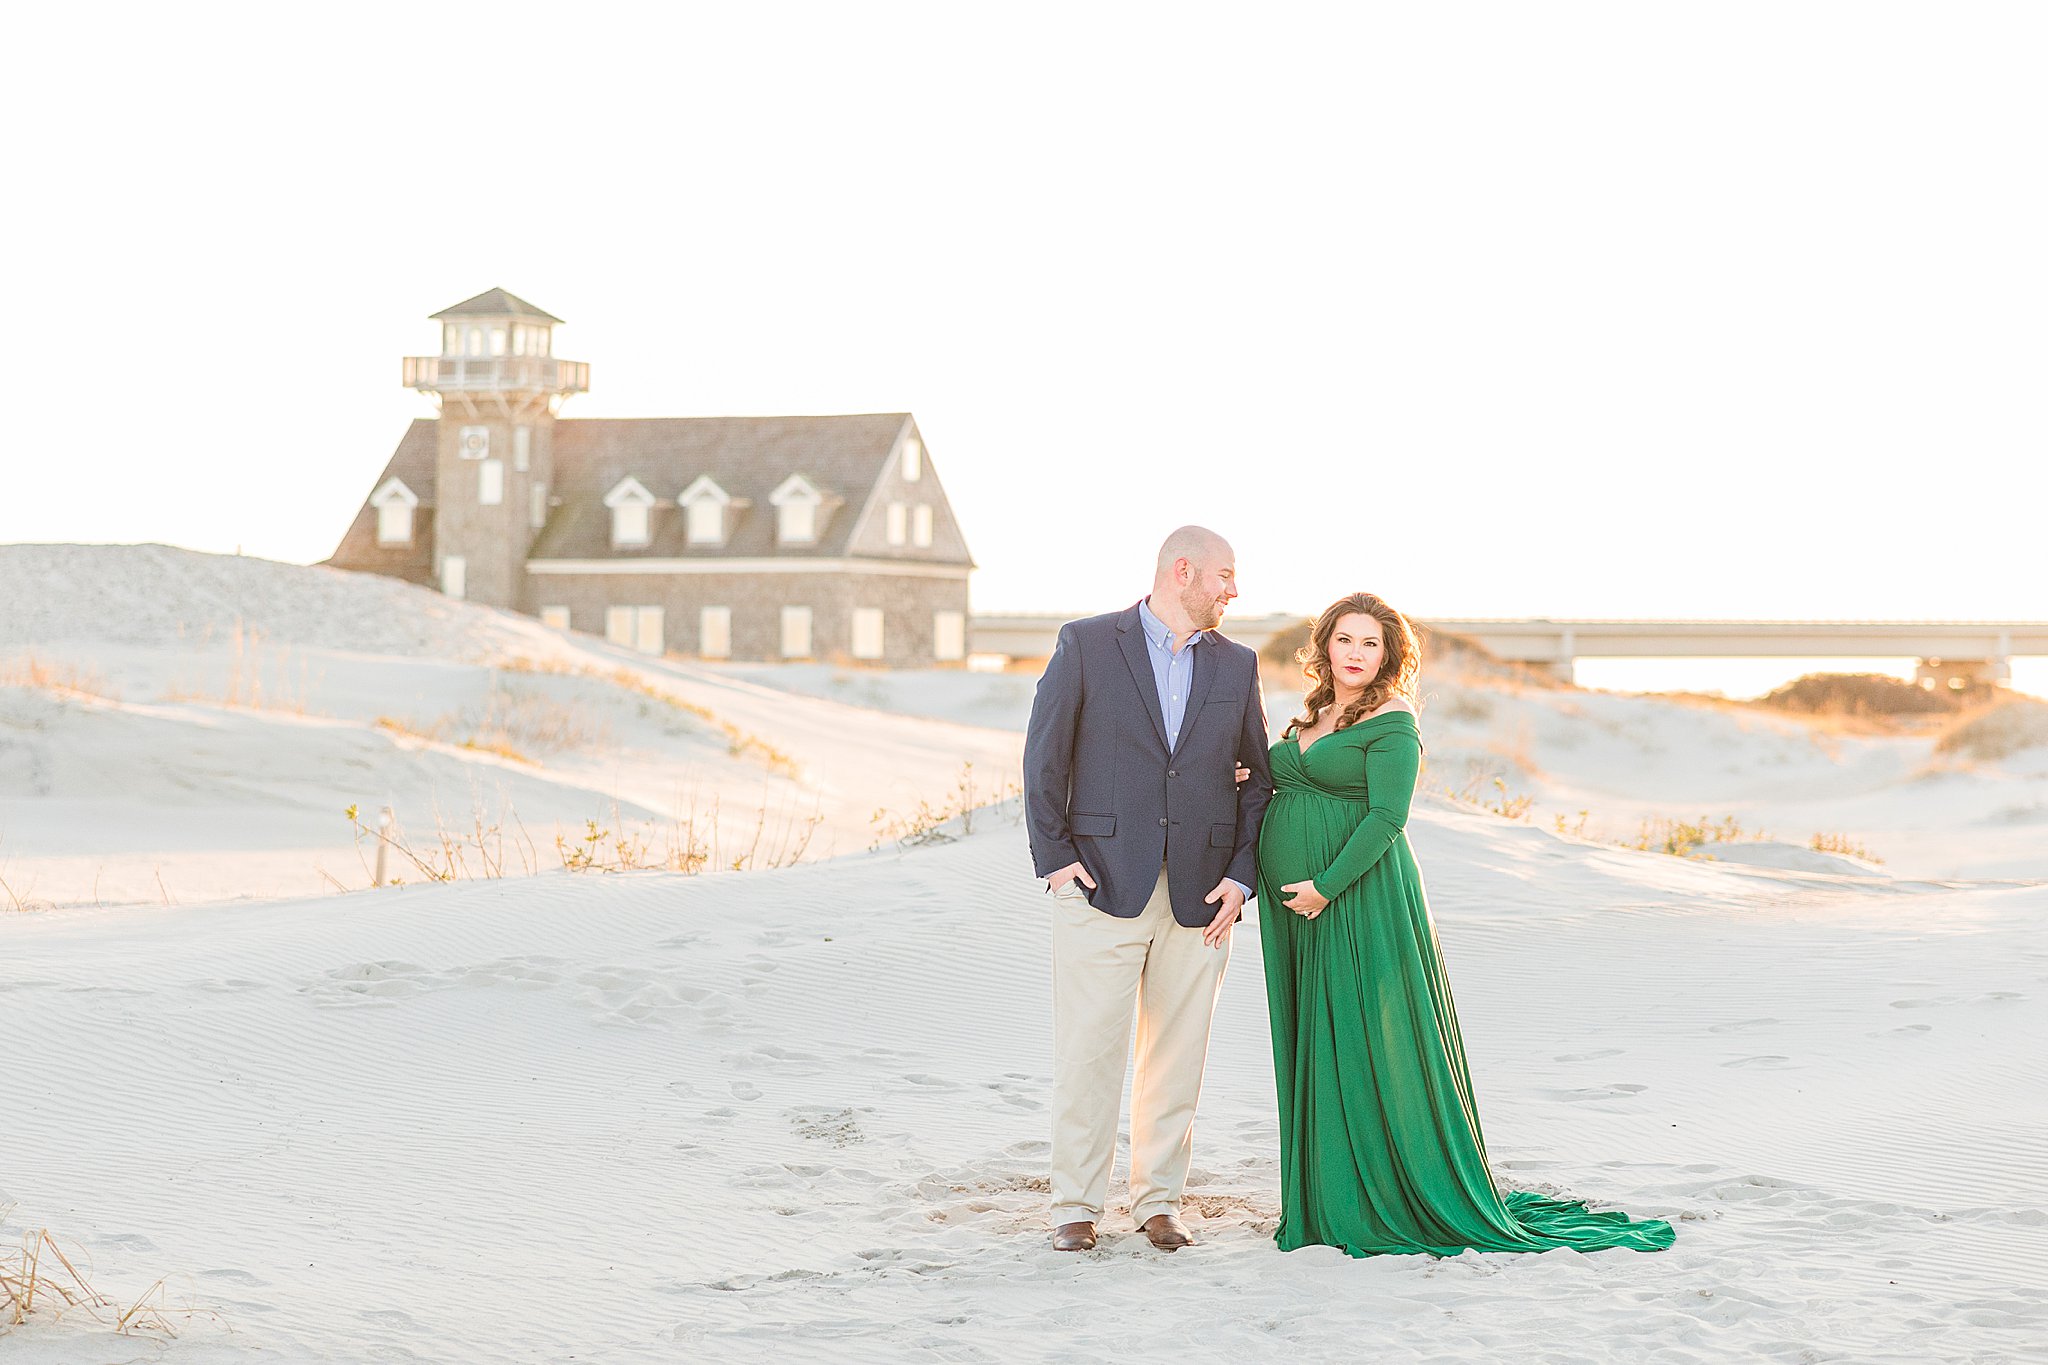 Outer Banks Maternity Photography - Expecting mother posing on sandy beach